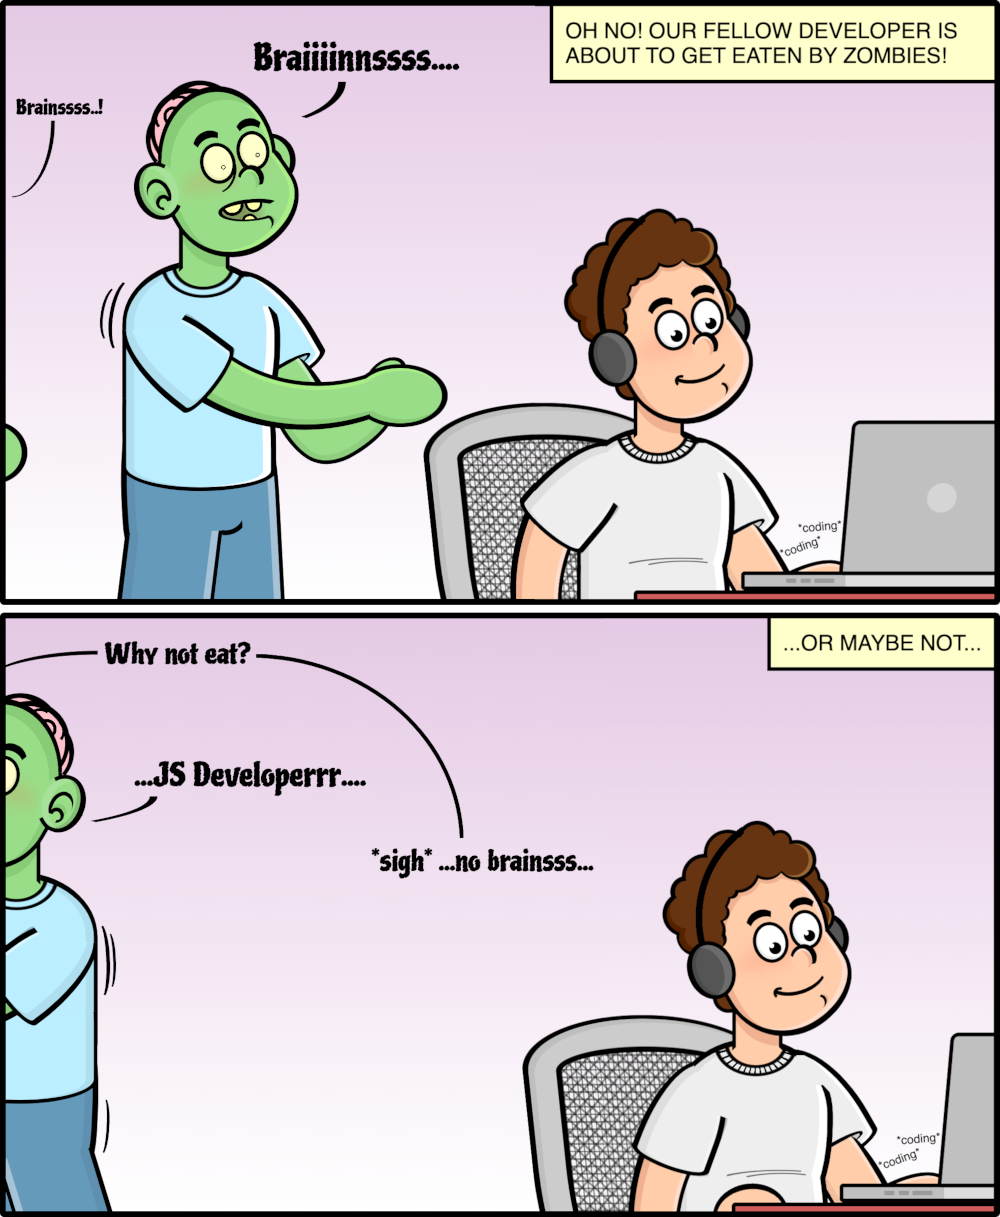 Cartoon with to panels showing zombies lurking around a person using a computer, they leave and one zombie asks 'why not eat?', another zombie replies 'JS developer', and the first zombie replies '*sigh* no brain'.